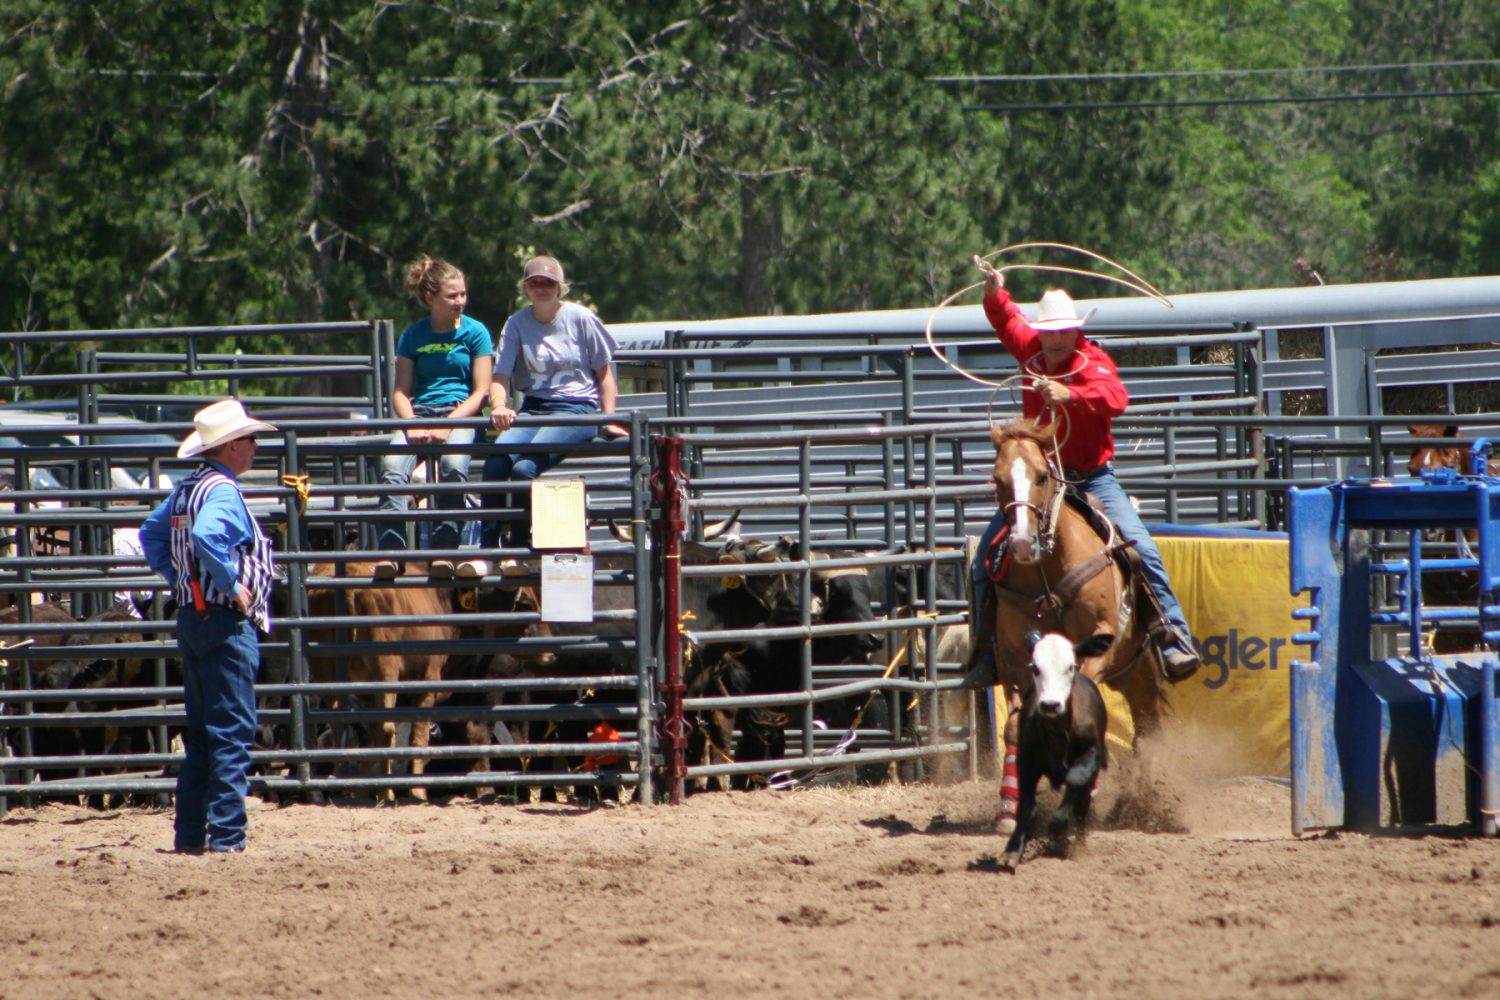 32nd Annual Wisconsin River Pro Rodeo wrap-up